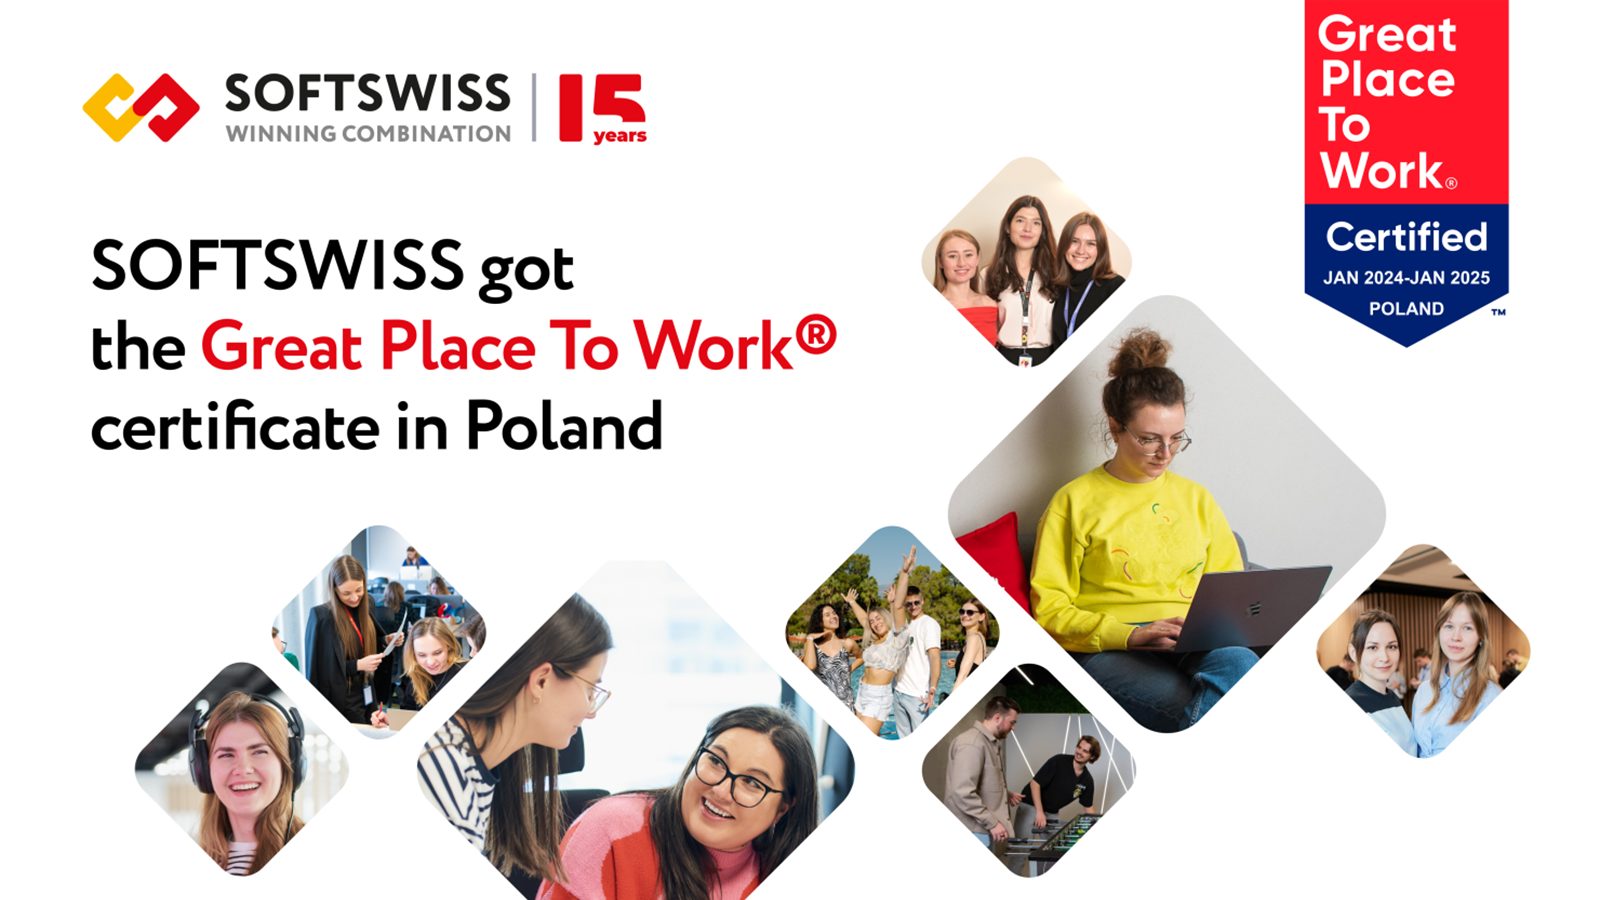 SOFTSWISS - Leading Workplace Innovation